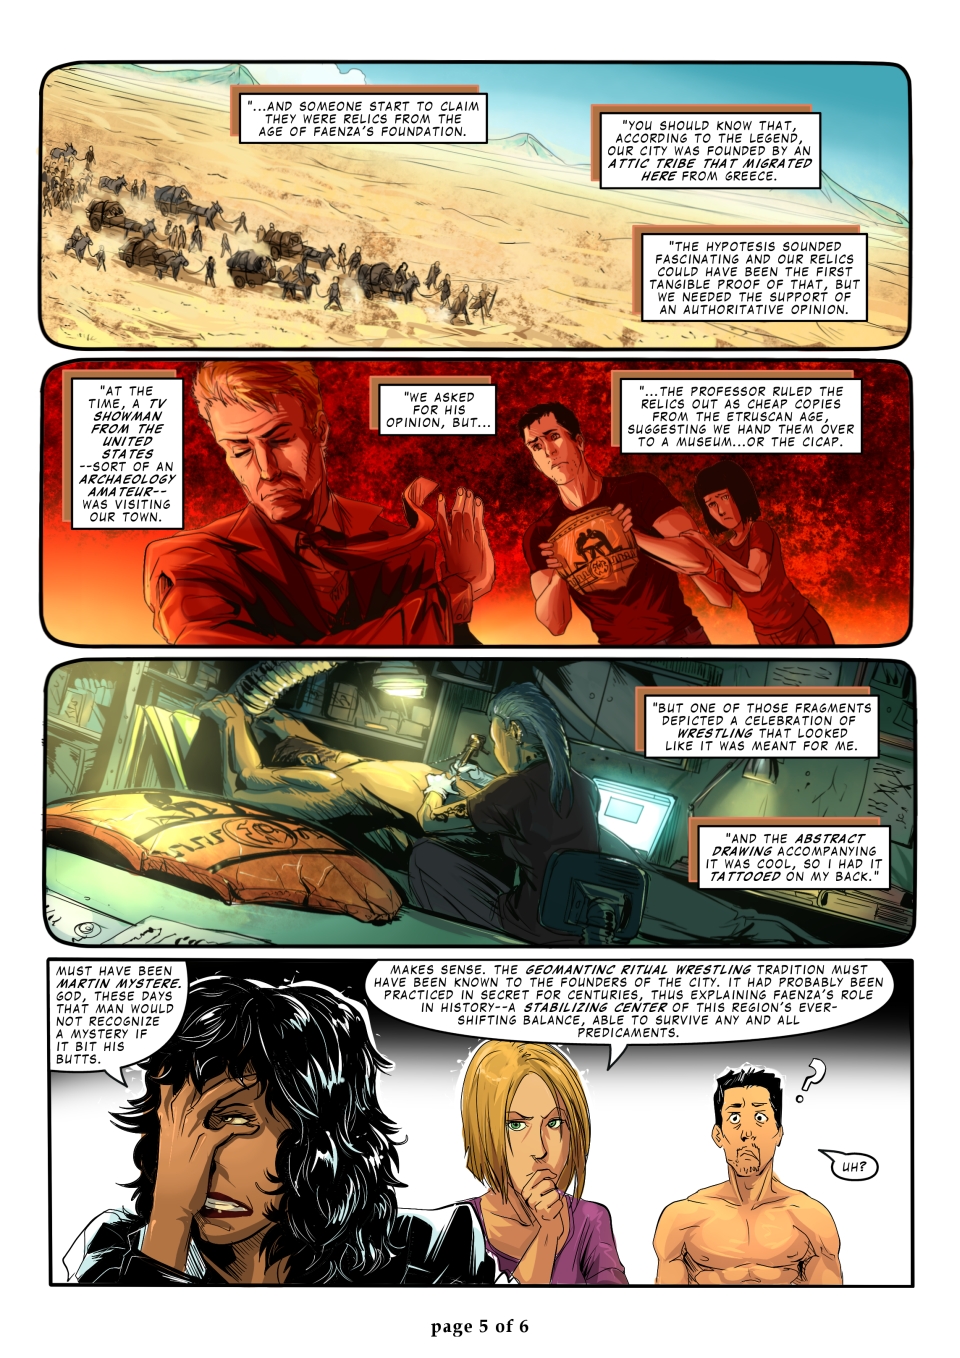 GaL Mistery in Faenza (Part 02 pg 05)